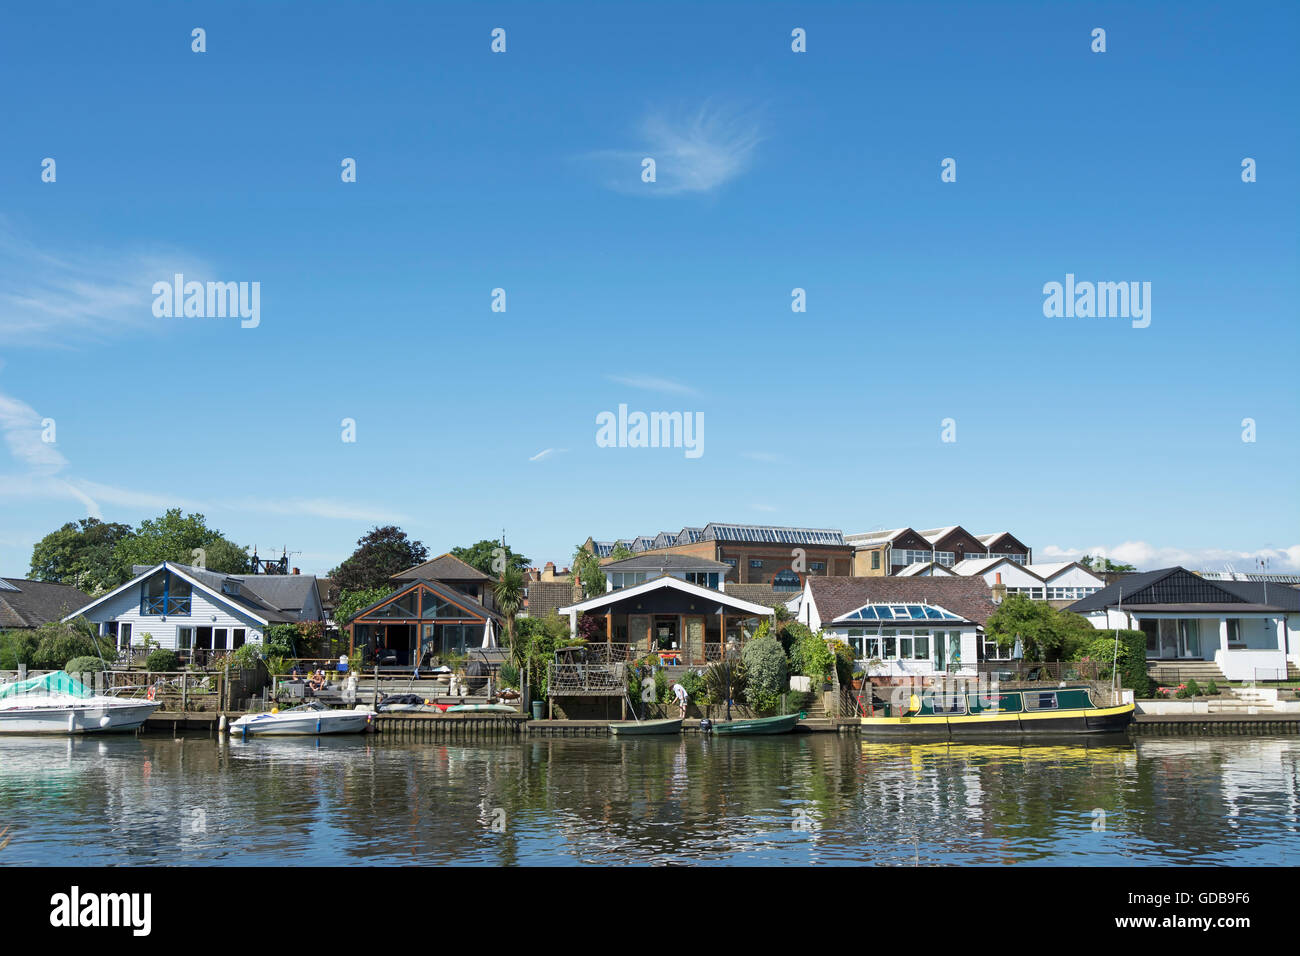 homes lining the river thames in thames ditton, surrey, england, seen from the opposite bank Stock Photo